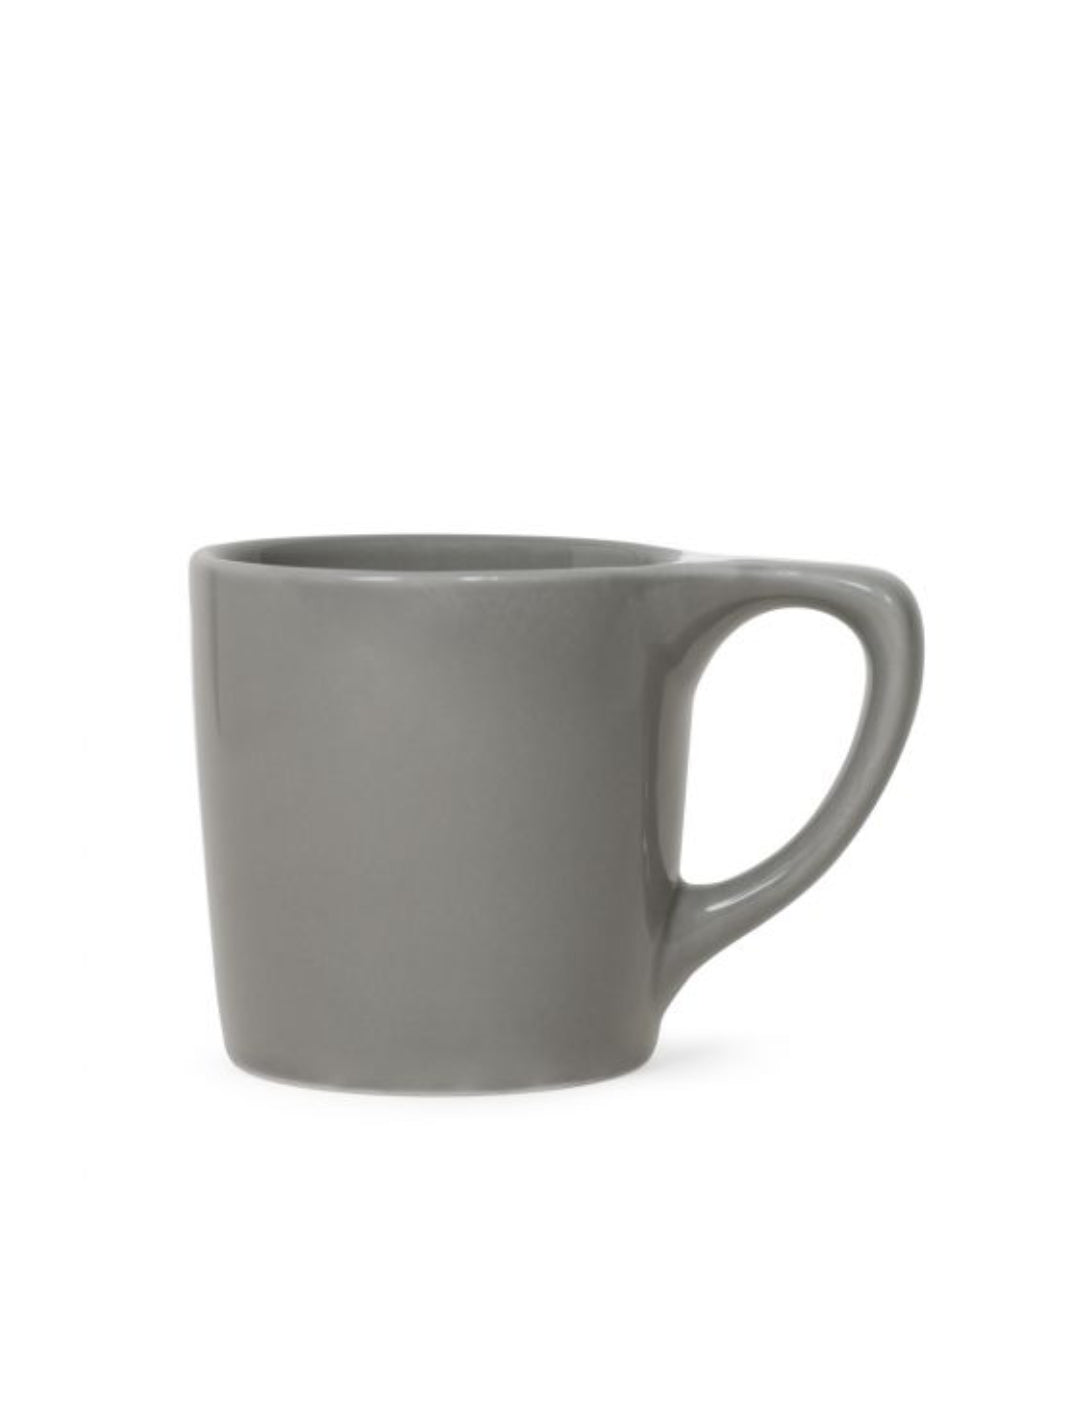 https://www.eightouncecoffsee.shop/wp-content/uploads/1700/77/well-discover-the-notneutral-lino-coffee-mug-10oz-296ml-notneutral-outlet-stores-suitable-for-you-and-our-team-of-experts_3.jpg